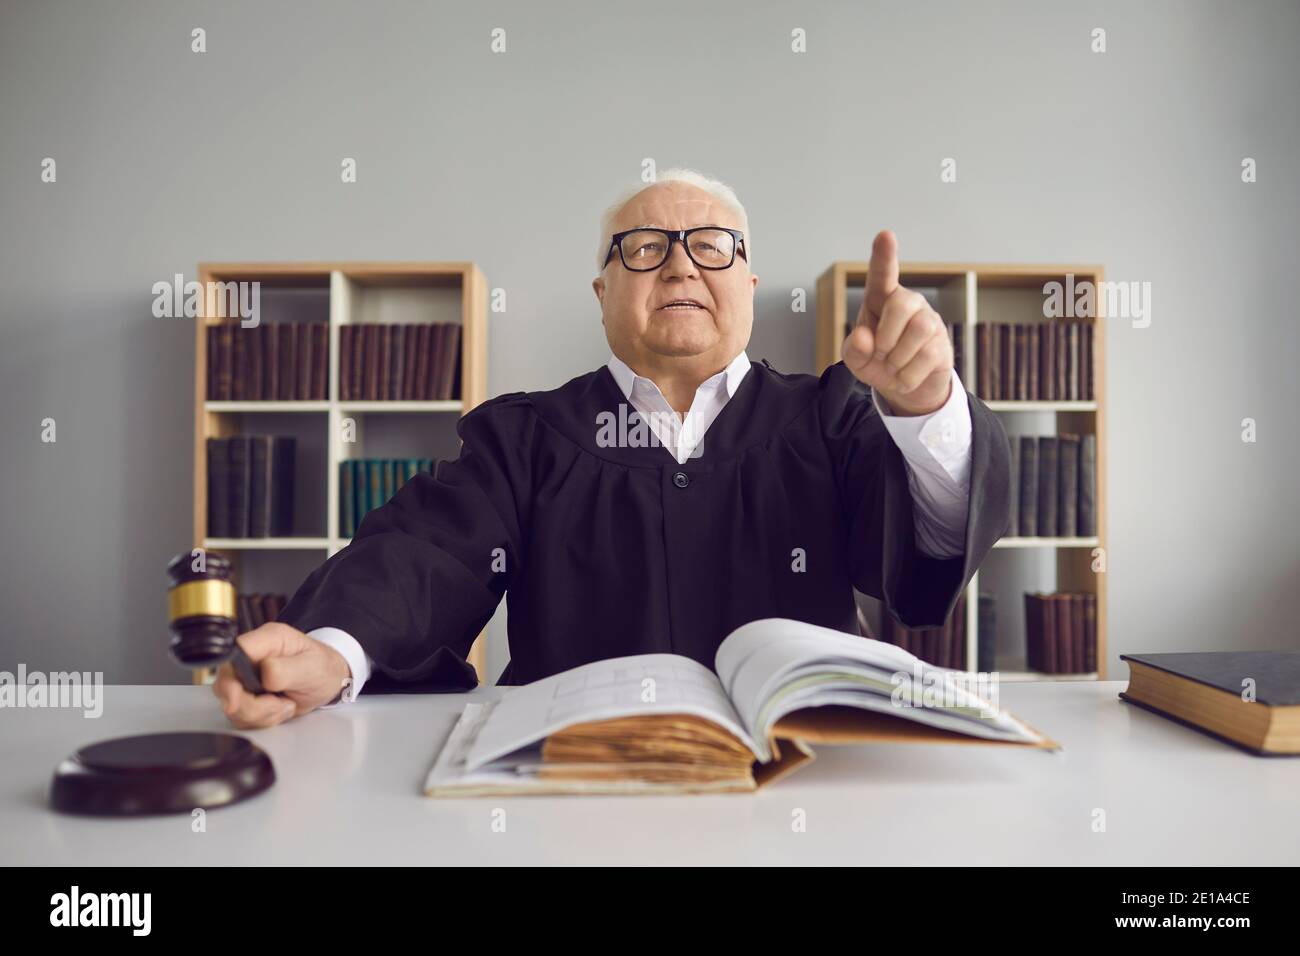 Strict judge hitting sound block with gavel and pronouncing sentence in court hearing Stock Photo